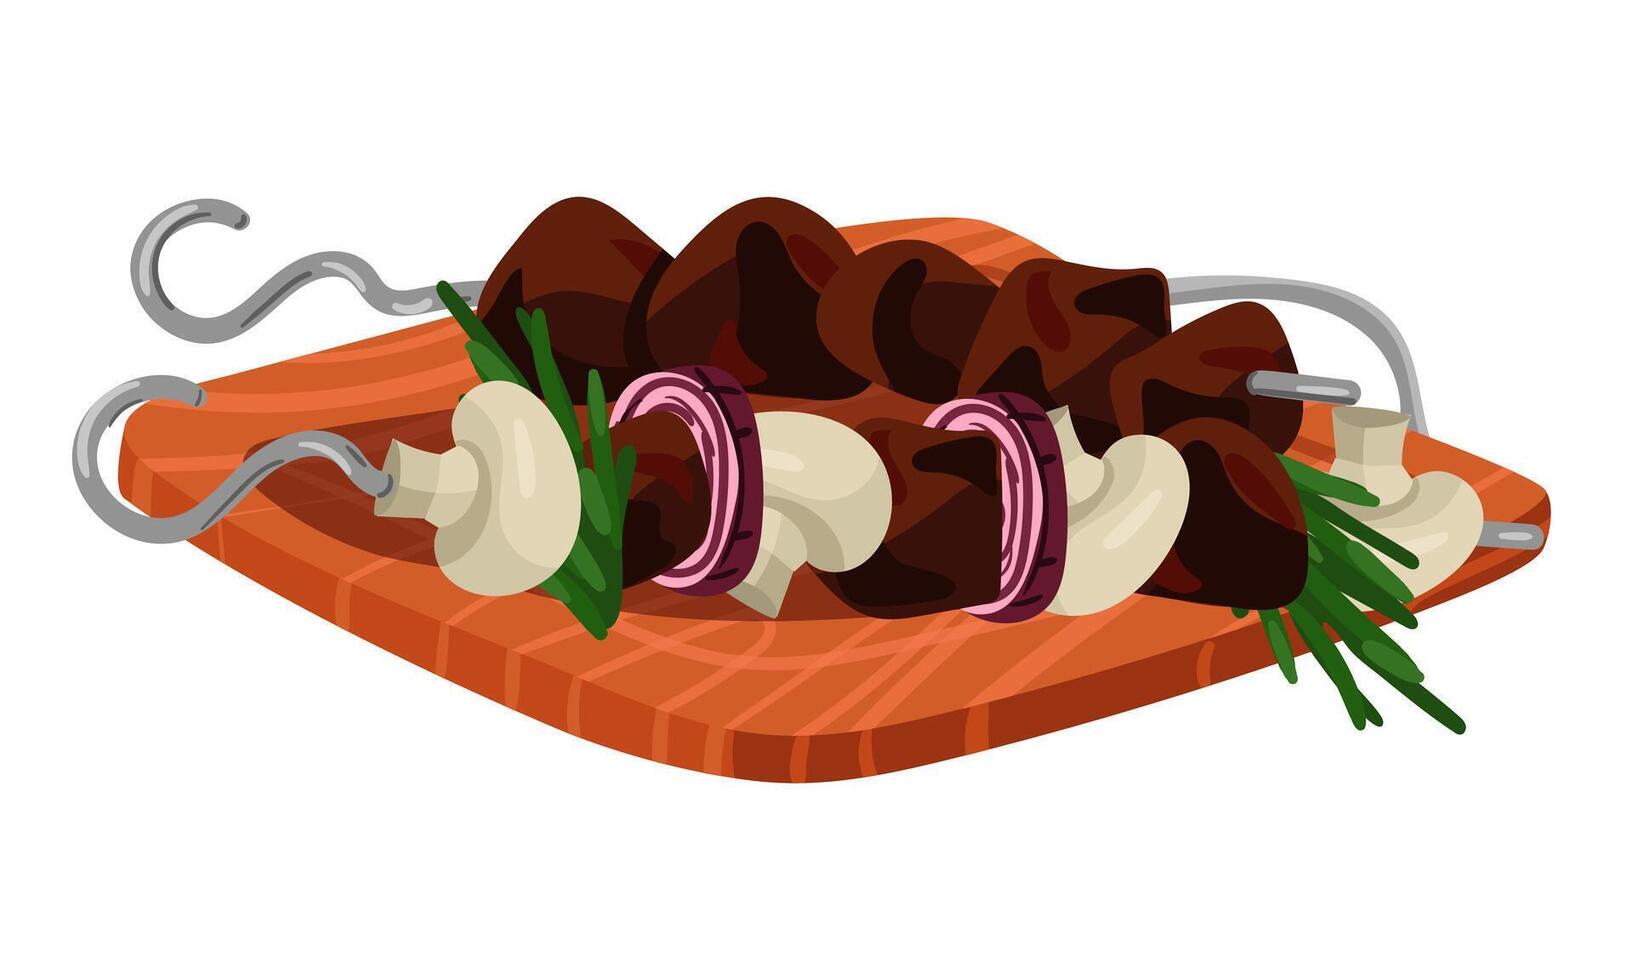 Skewers with barbecue are laid out on a wooden cutting board. Juicy pieces with mushrooms and onions. Meat with a skewer on a serving tray. For cooking blogs, recipe cards. illustration vector